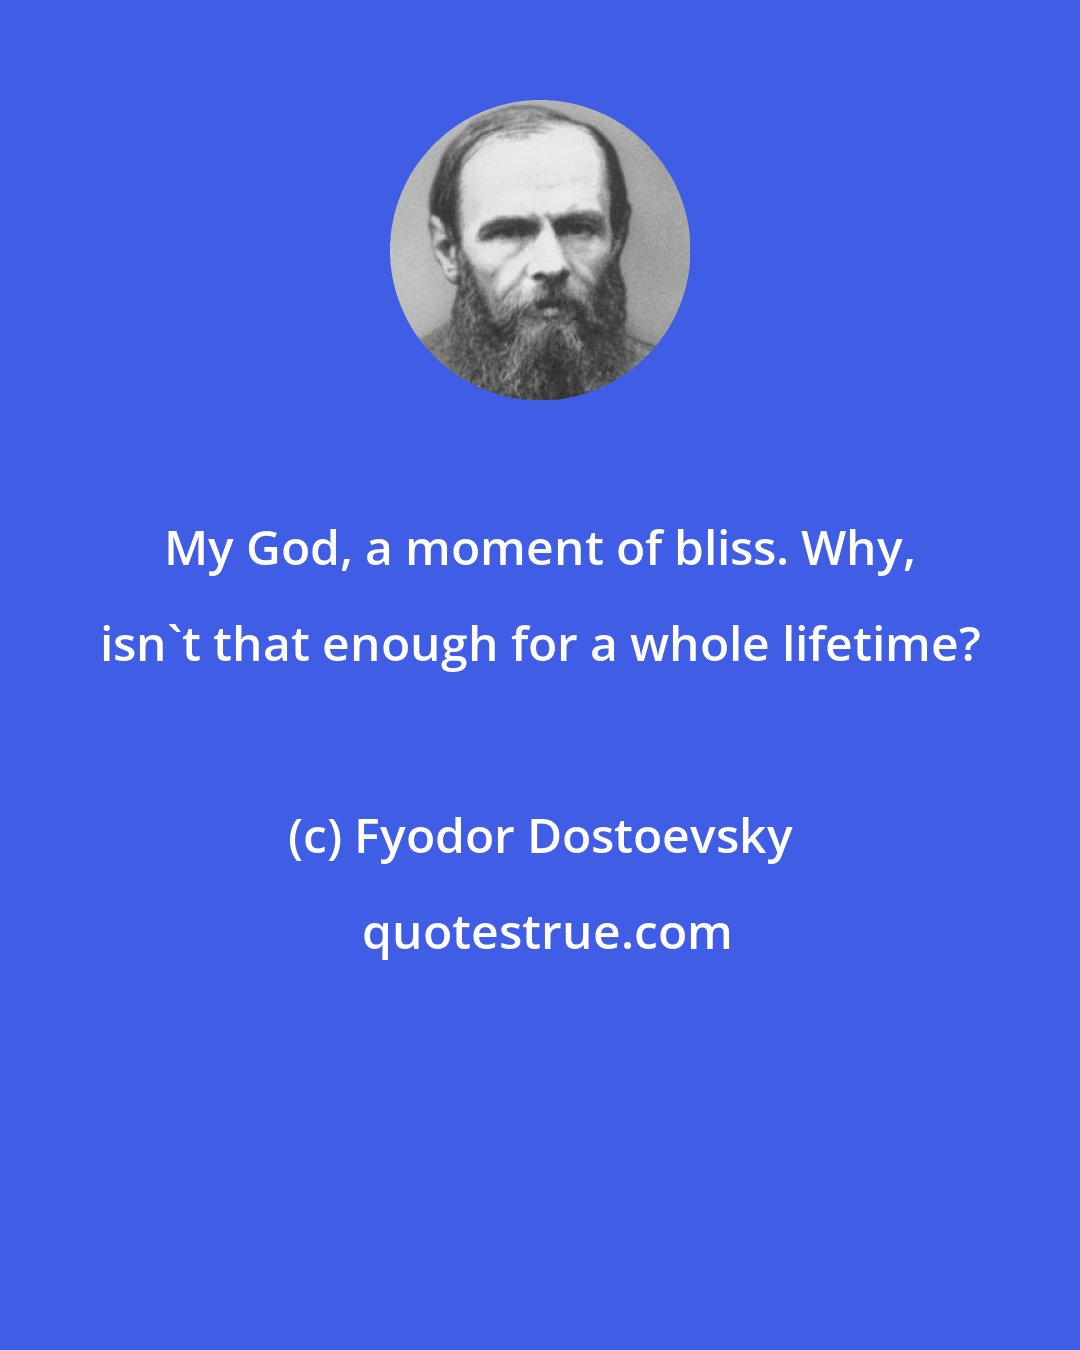 Fyodor Dostoevsky: My God, a moment of bliss. Why, isn't that enough for a whole lifetime?